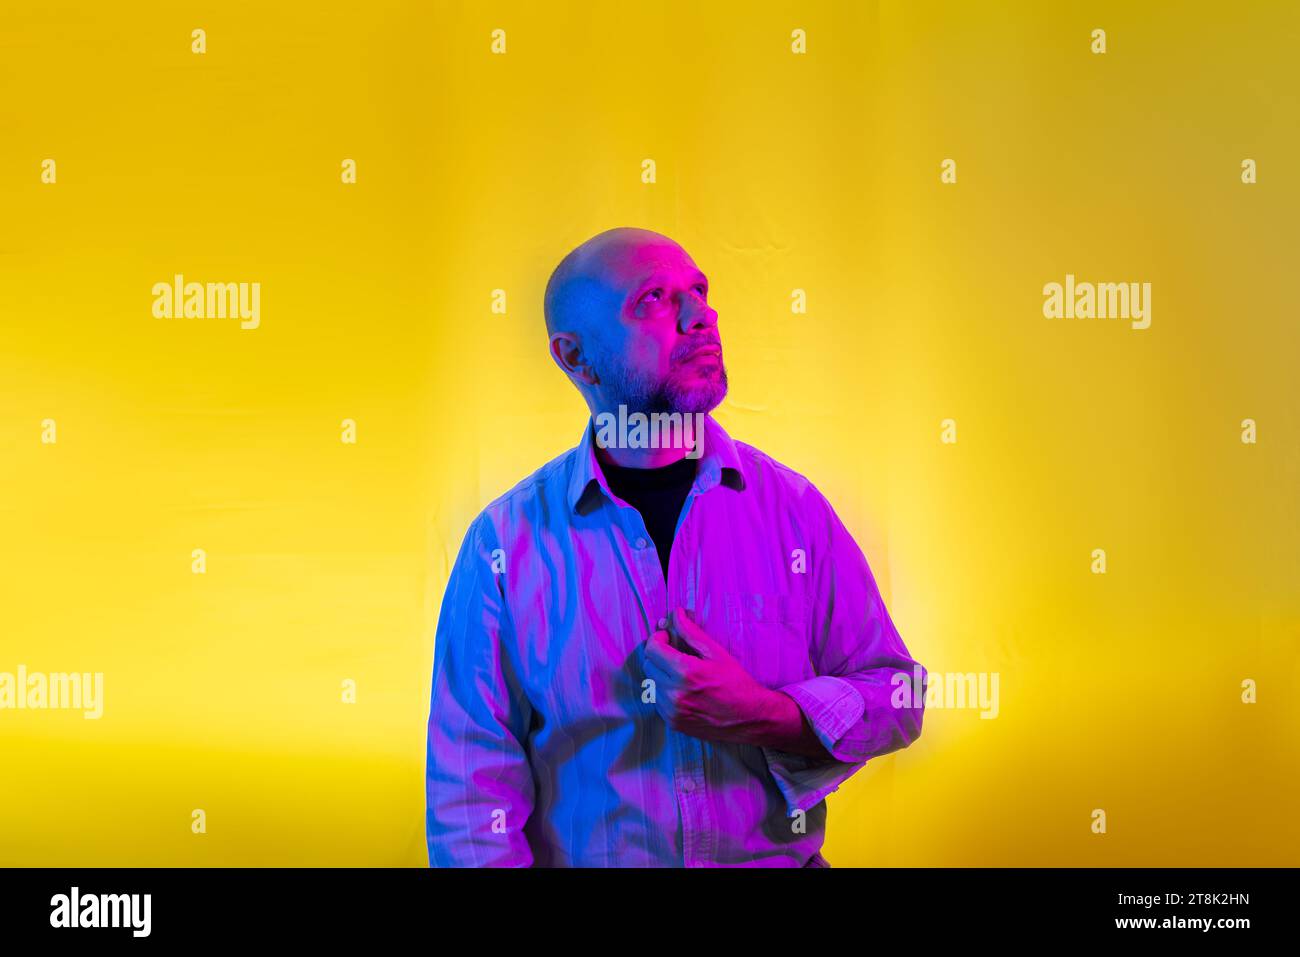 Bald, bearded man in dress shirt. Isolated on yellow background. Stock Photo